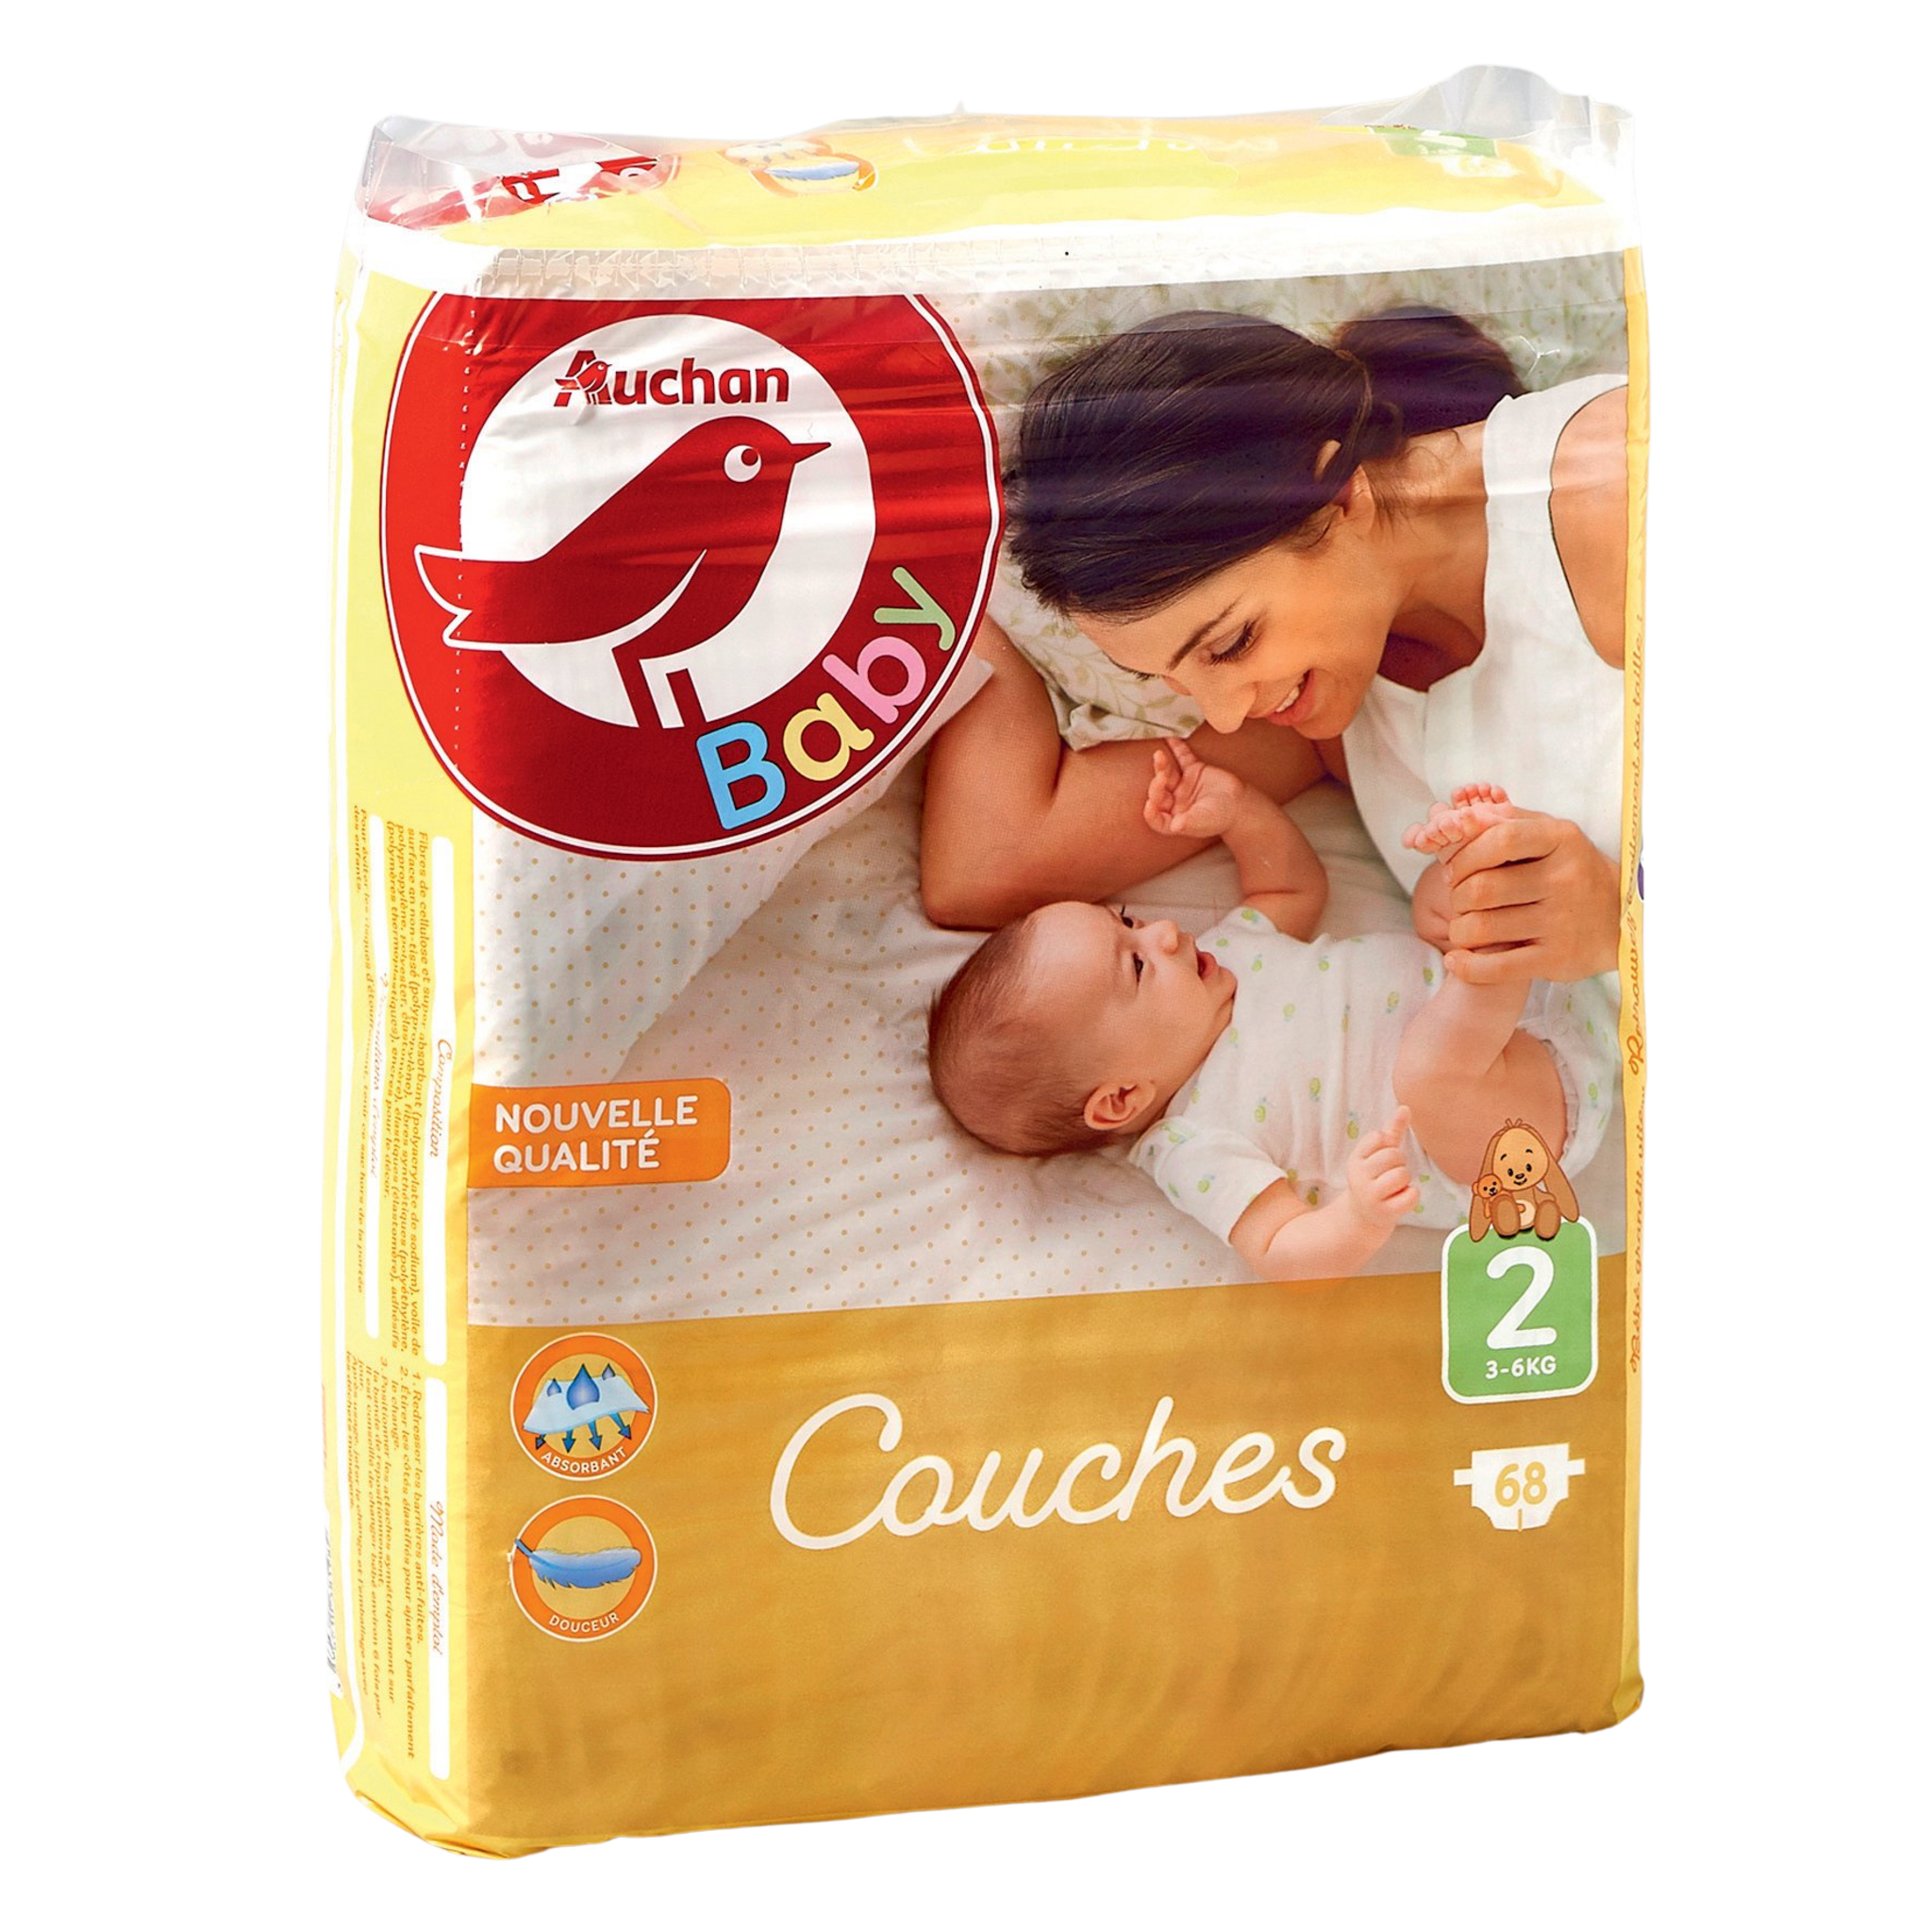 AUCHAN BABY : Couches taille 6 (13-27 kg) - chronodrive